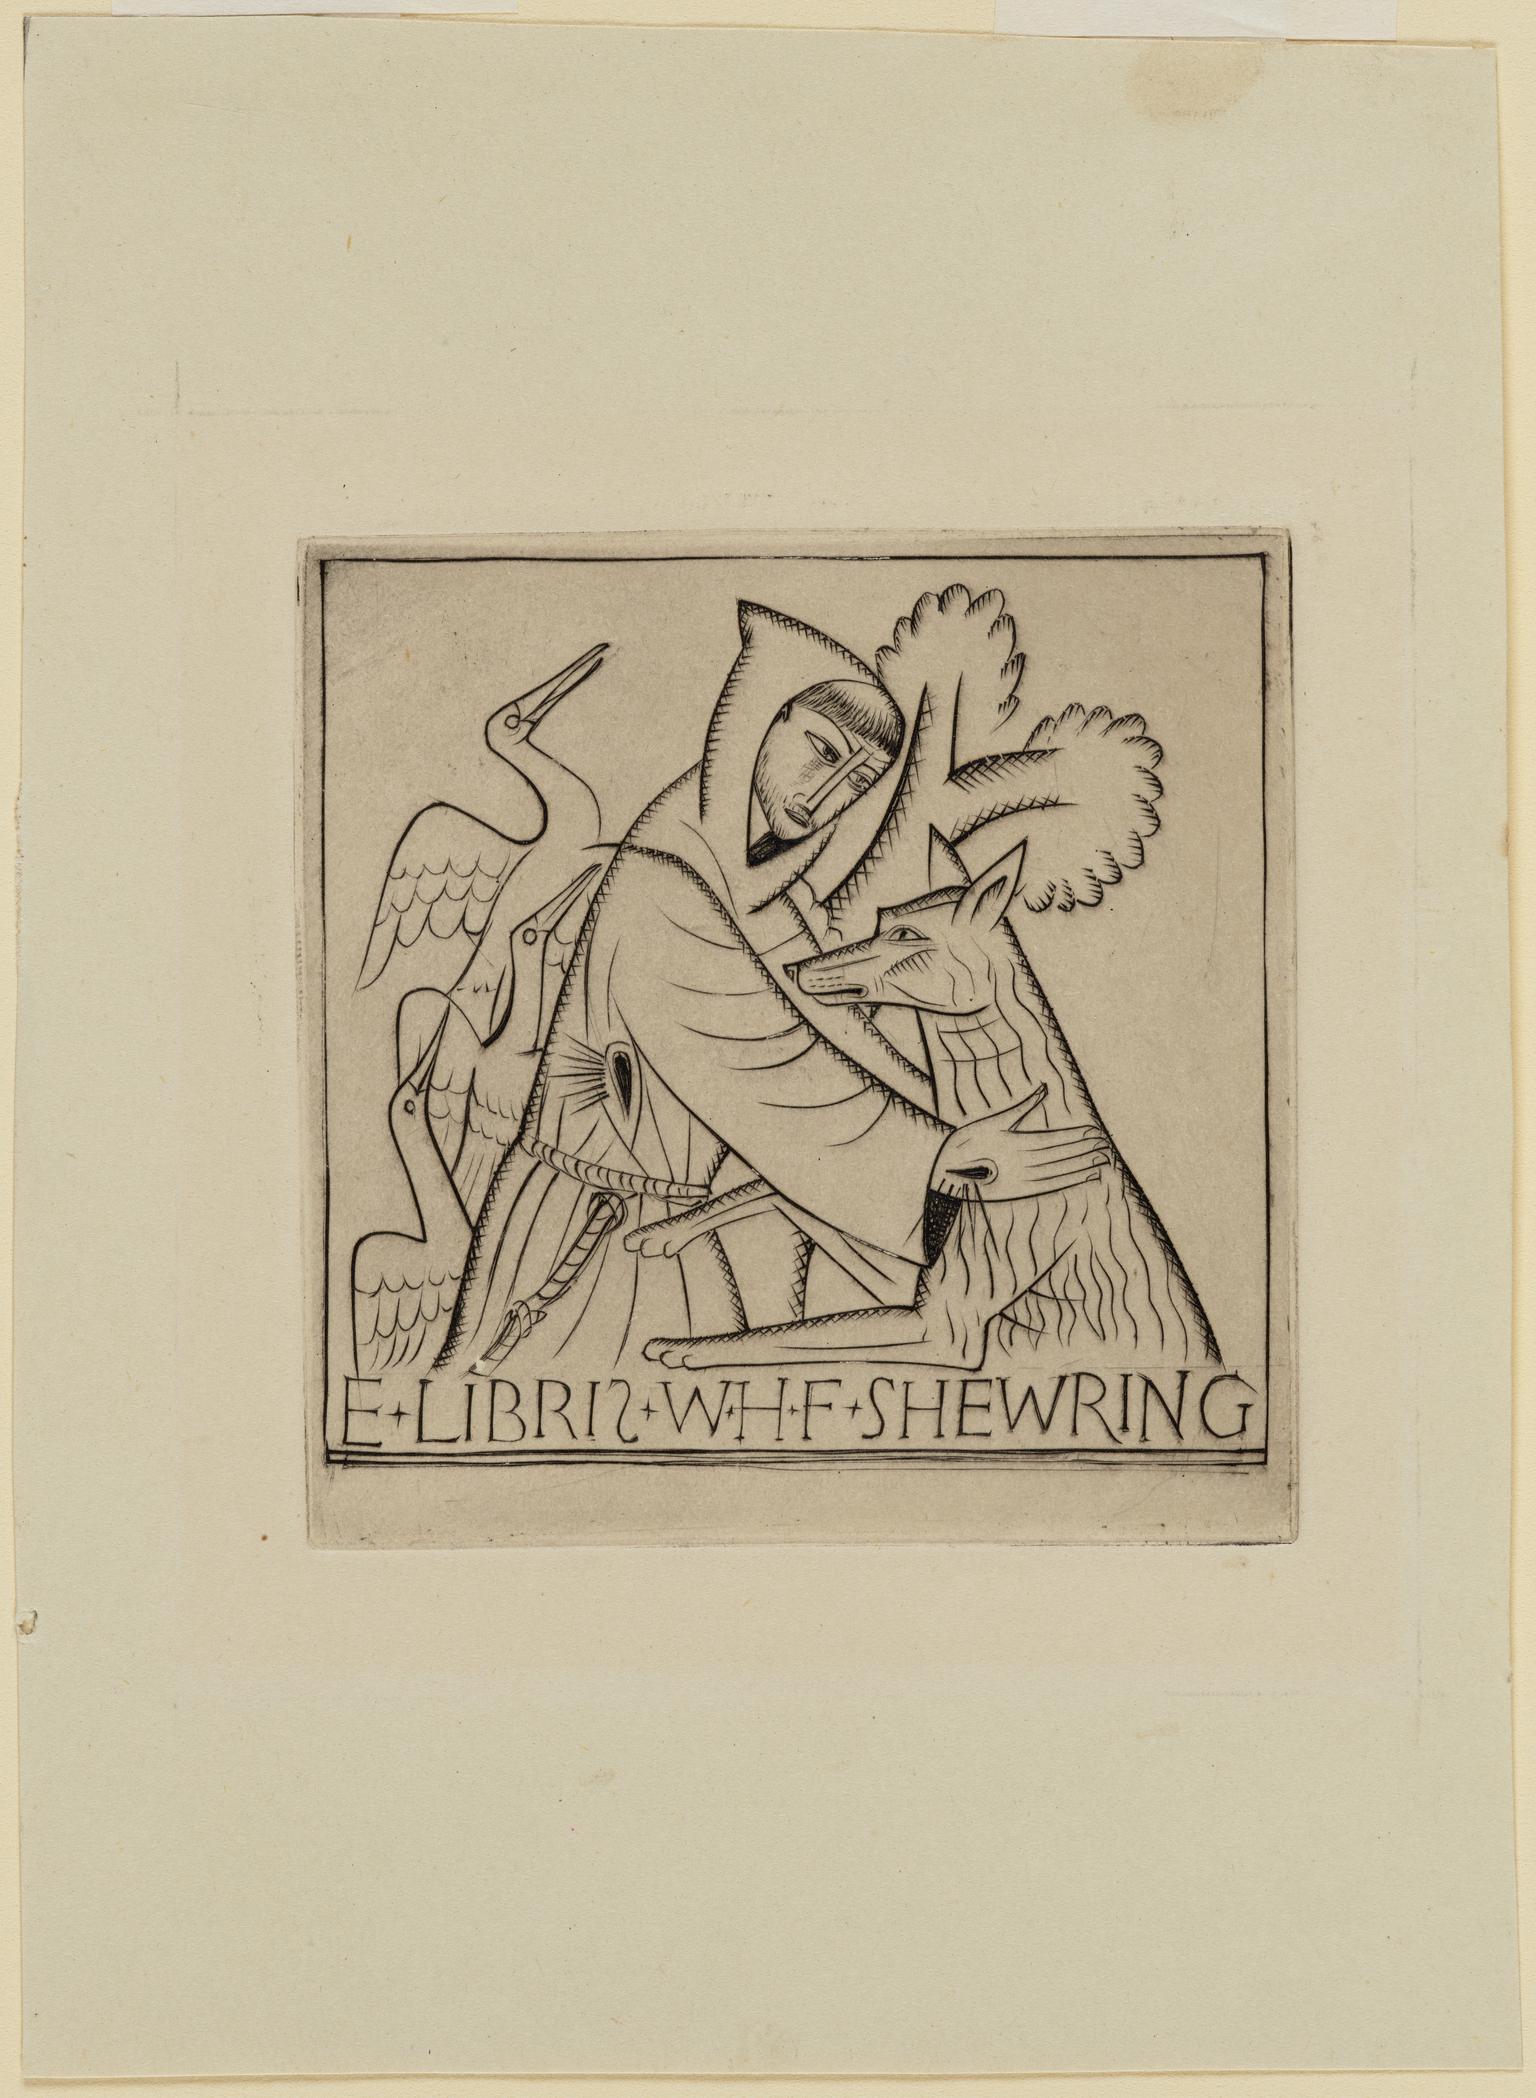 Bookplate of W H F Shewring